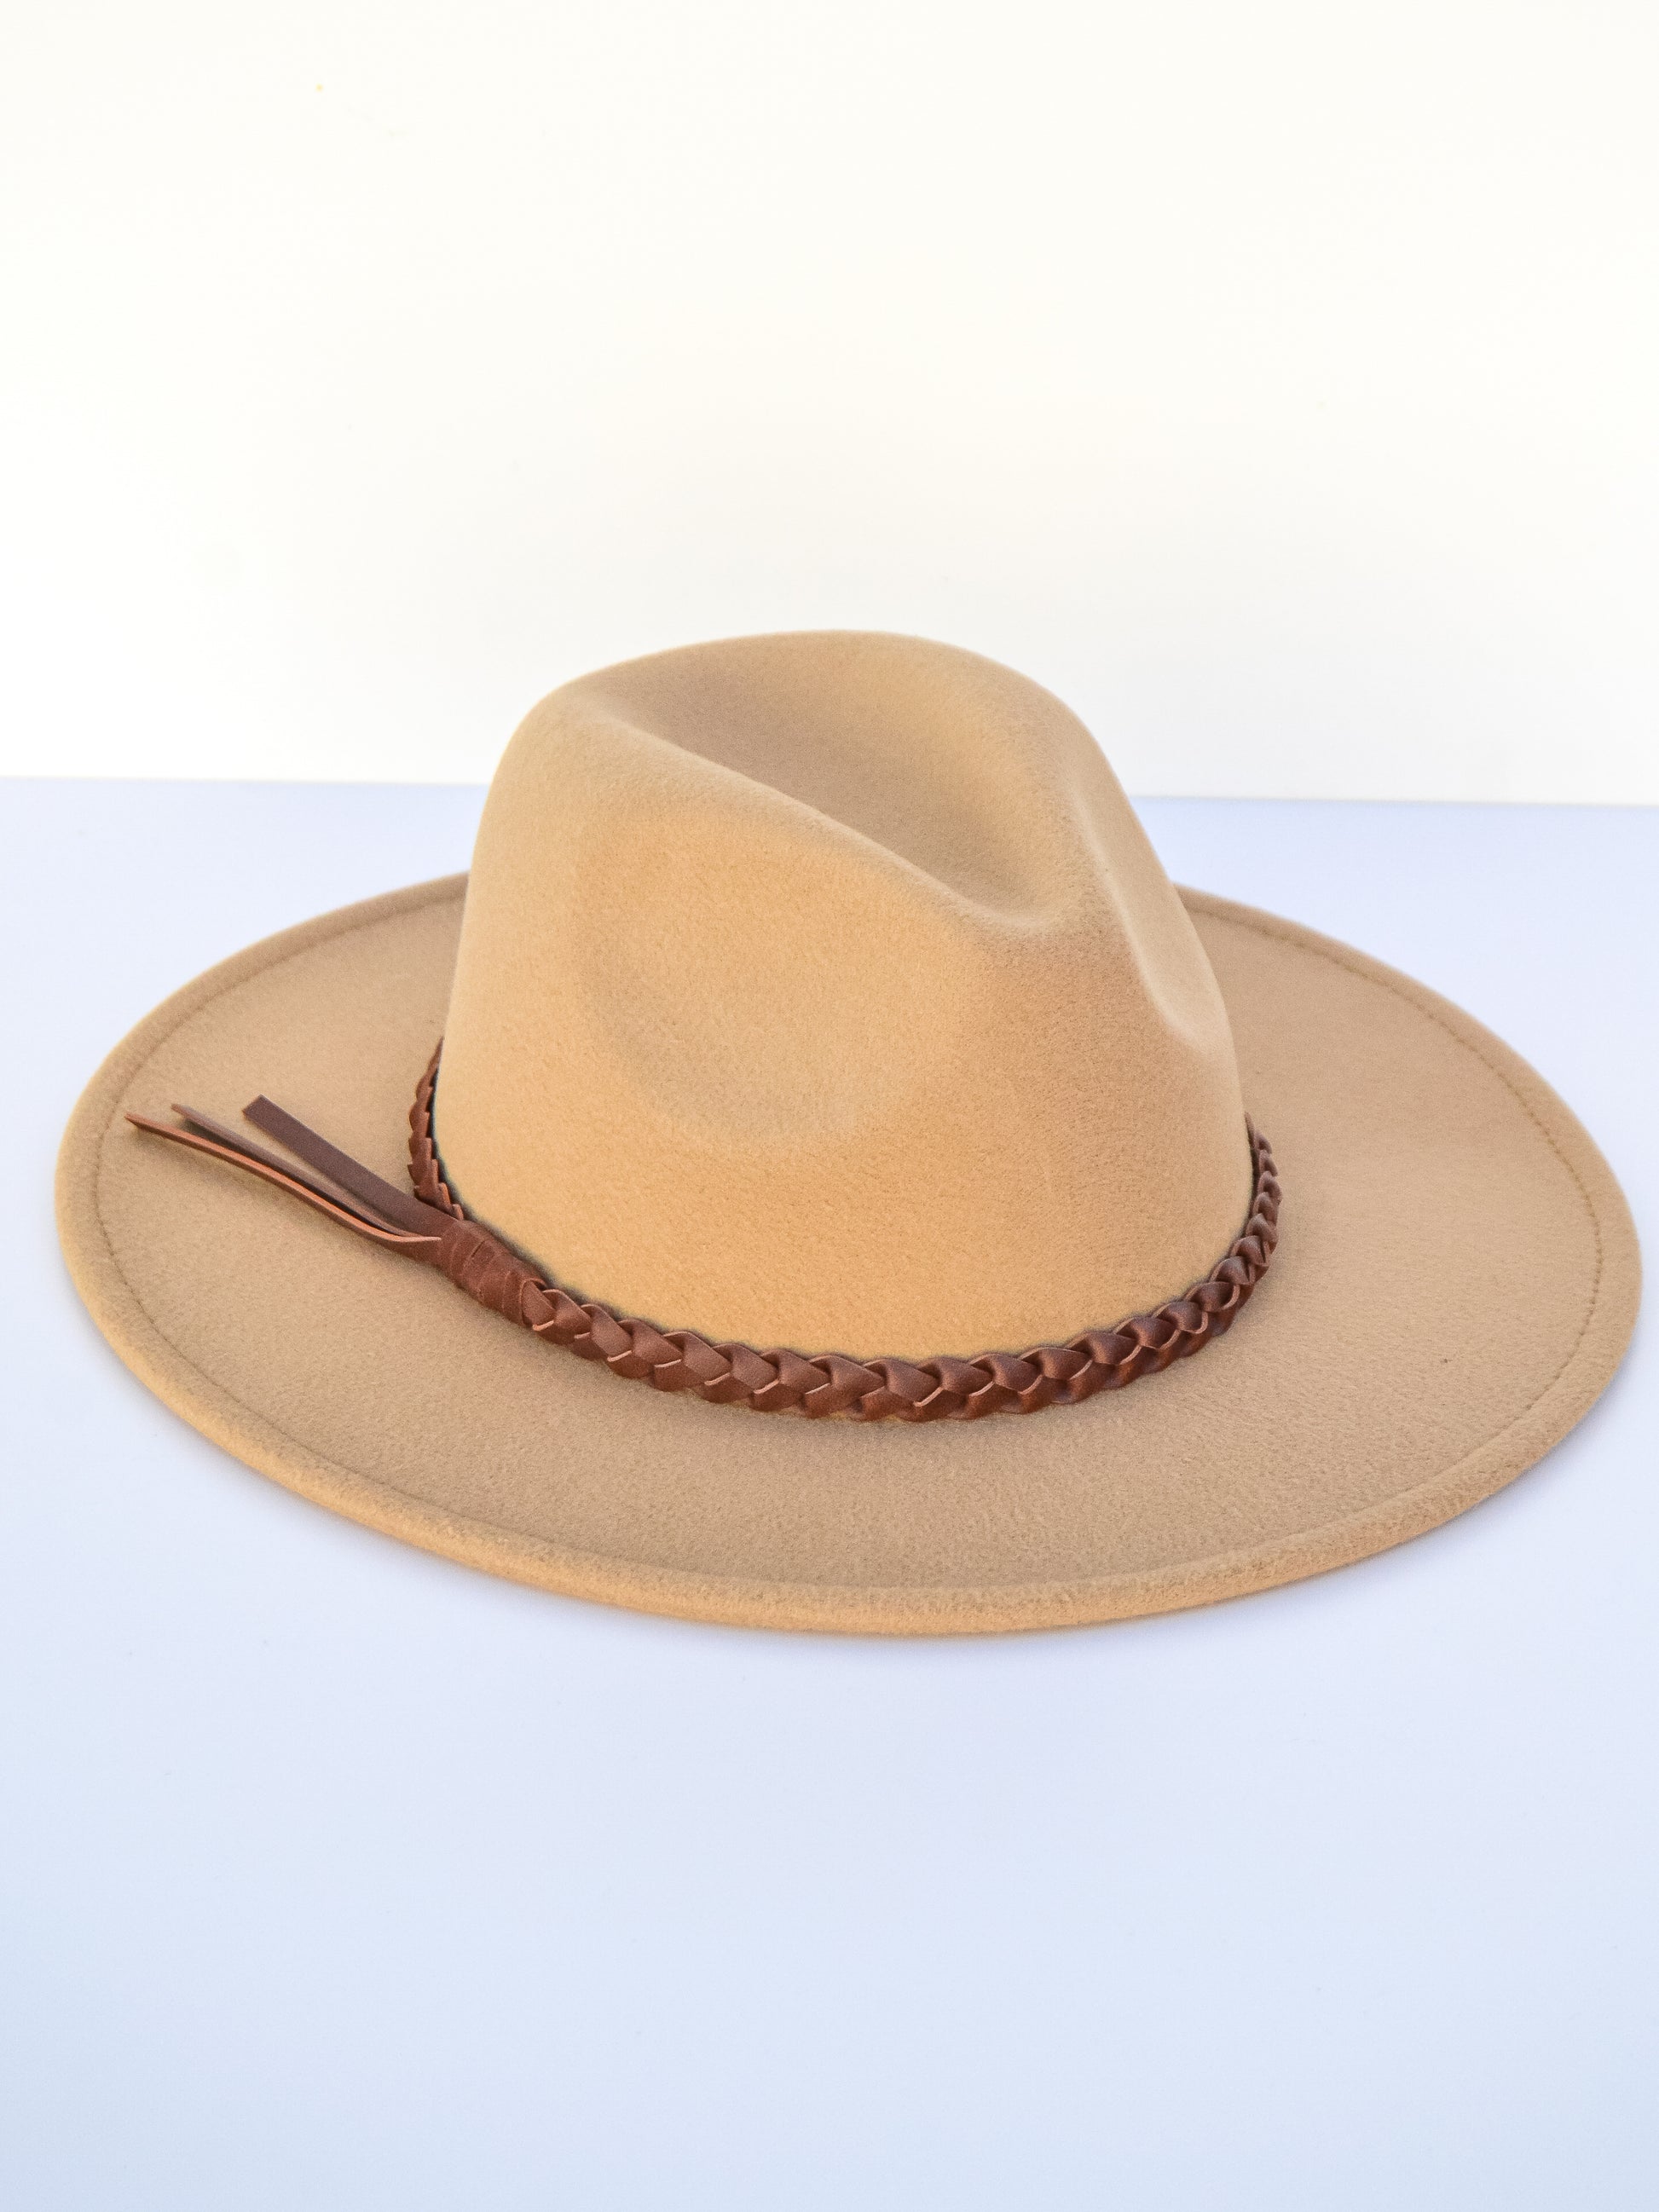 Wide brimmed hat with dark braided leather wrap 